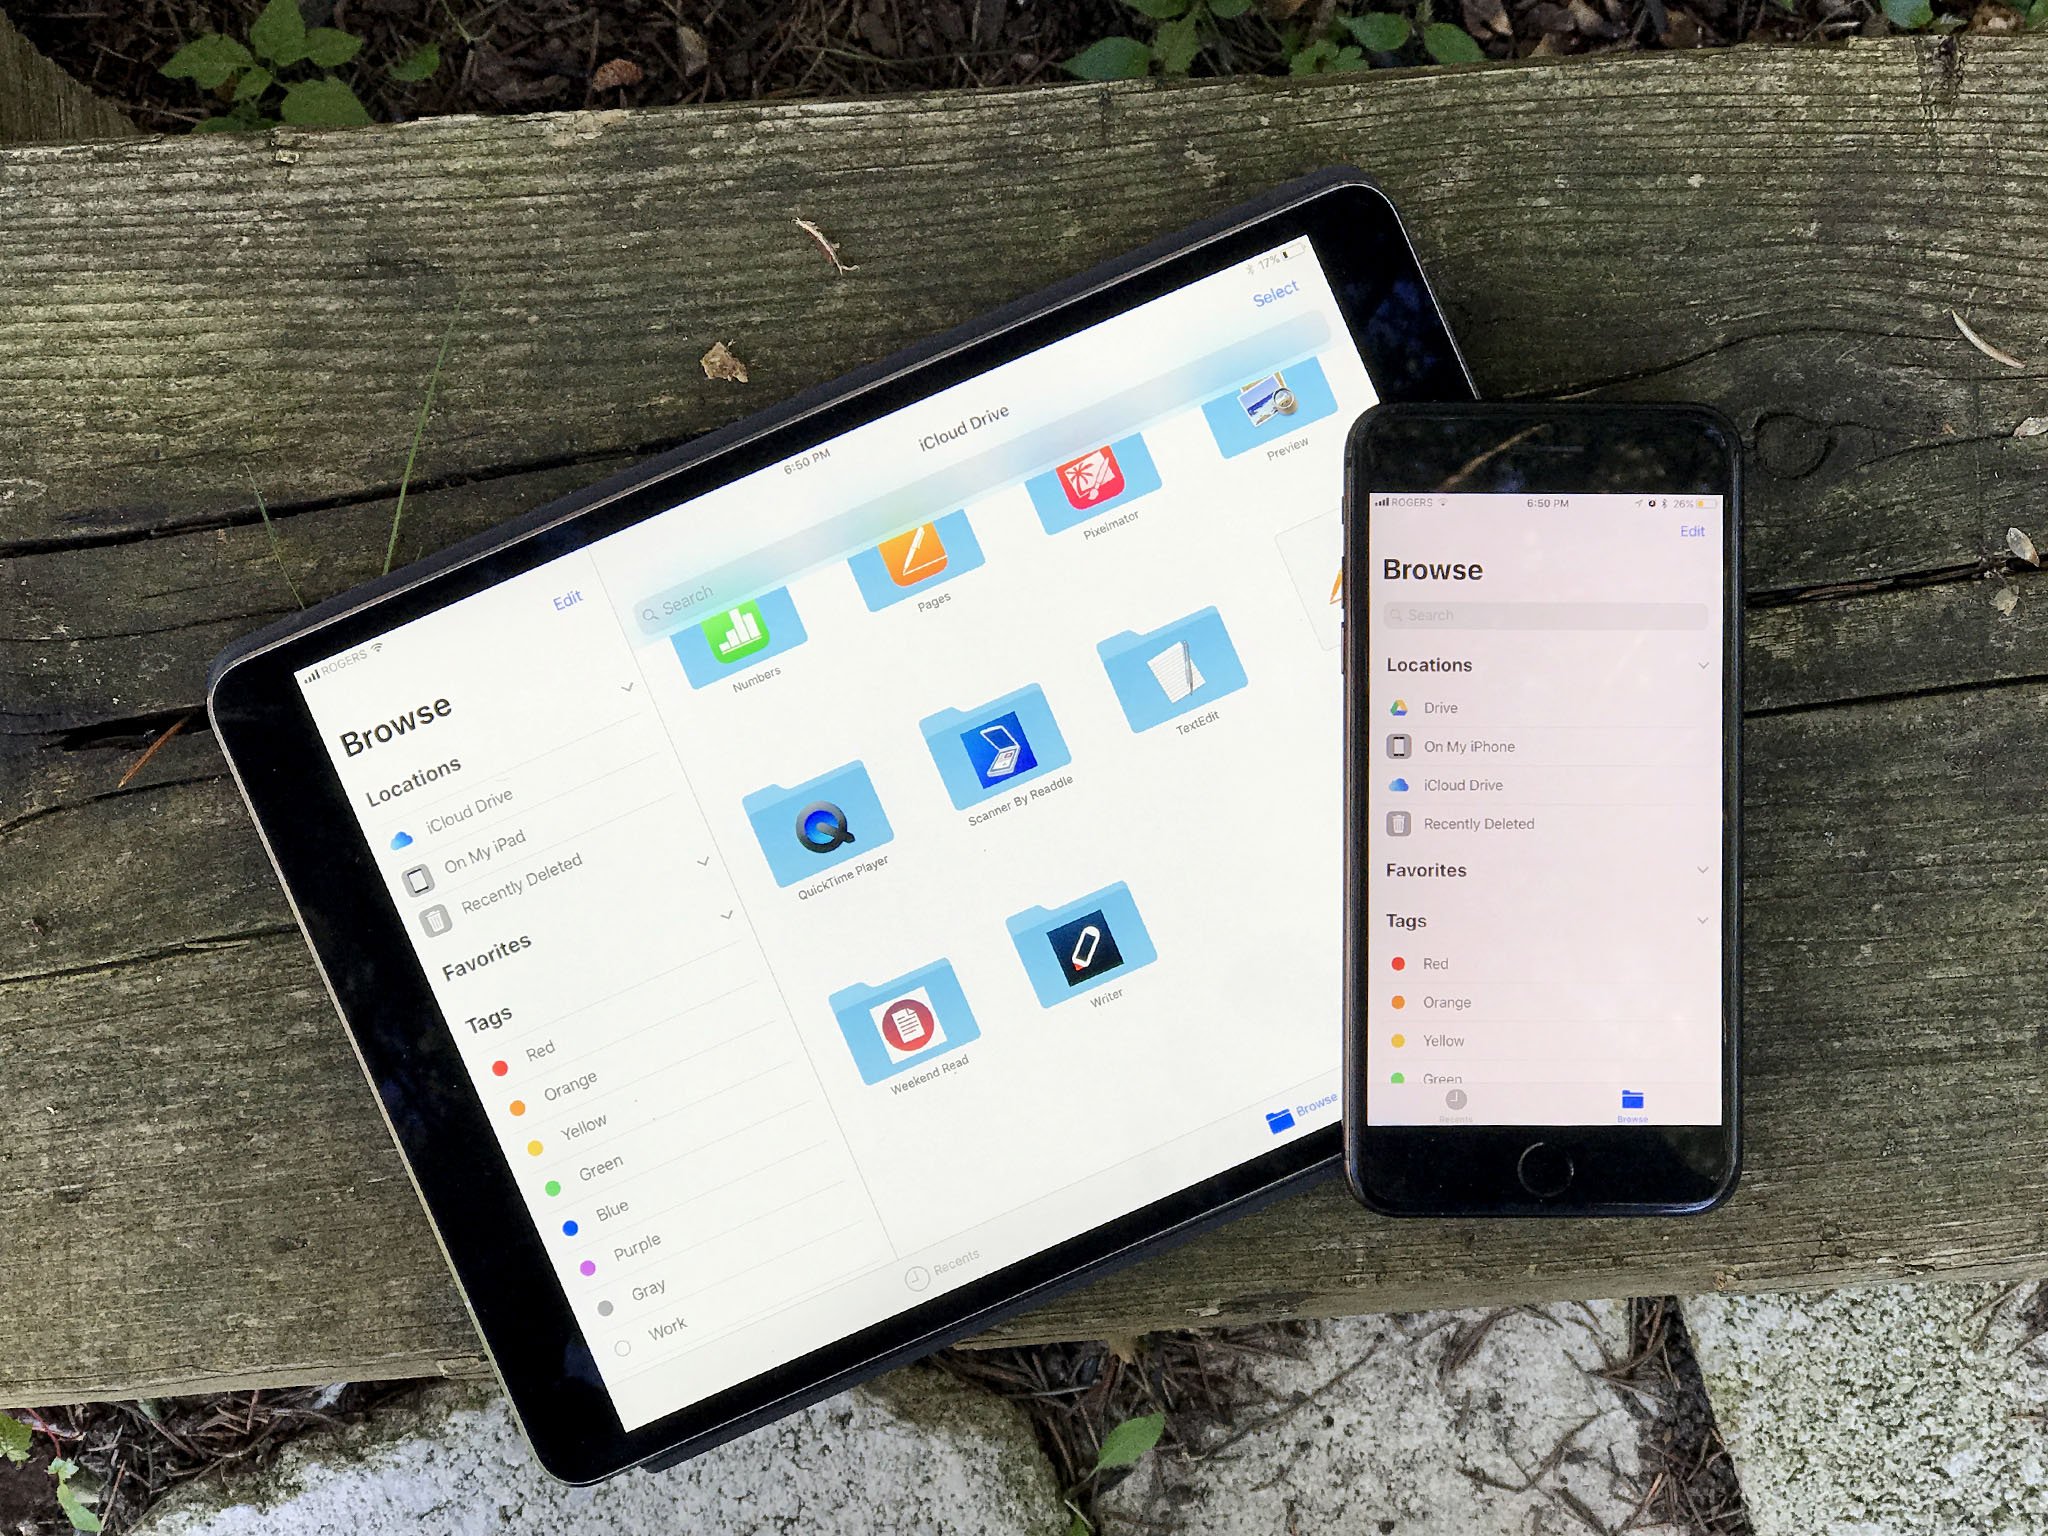 Find files on your iPhone or iPad in the Files app - Apple Support